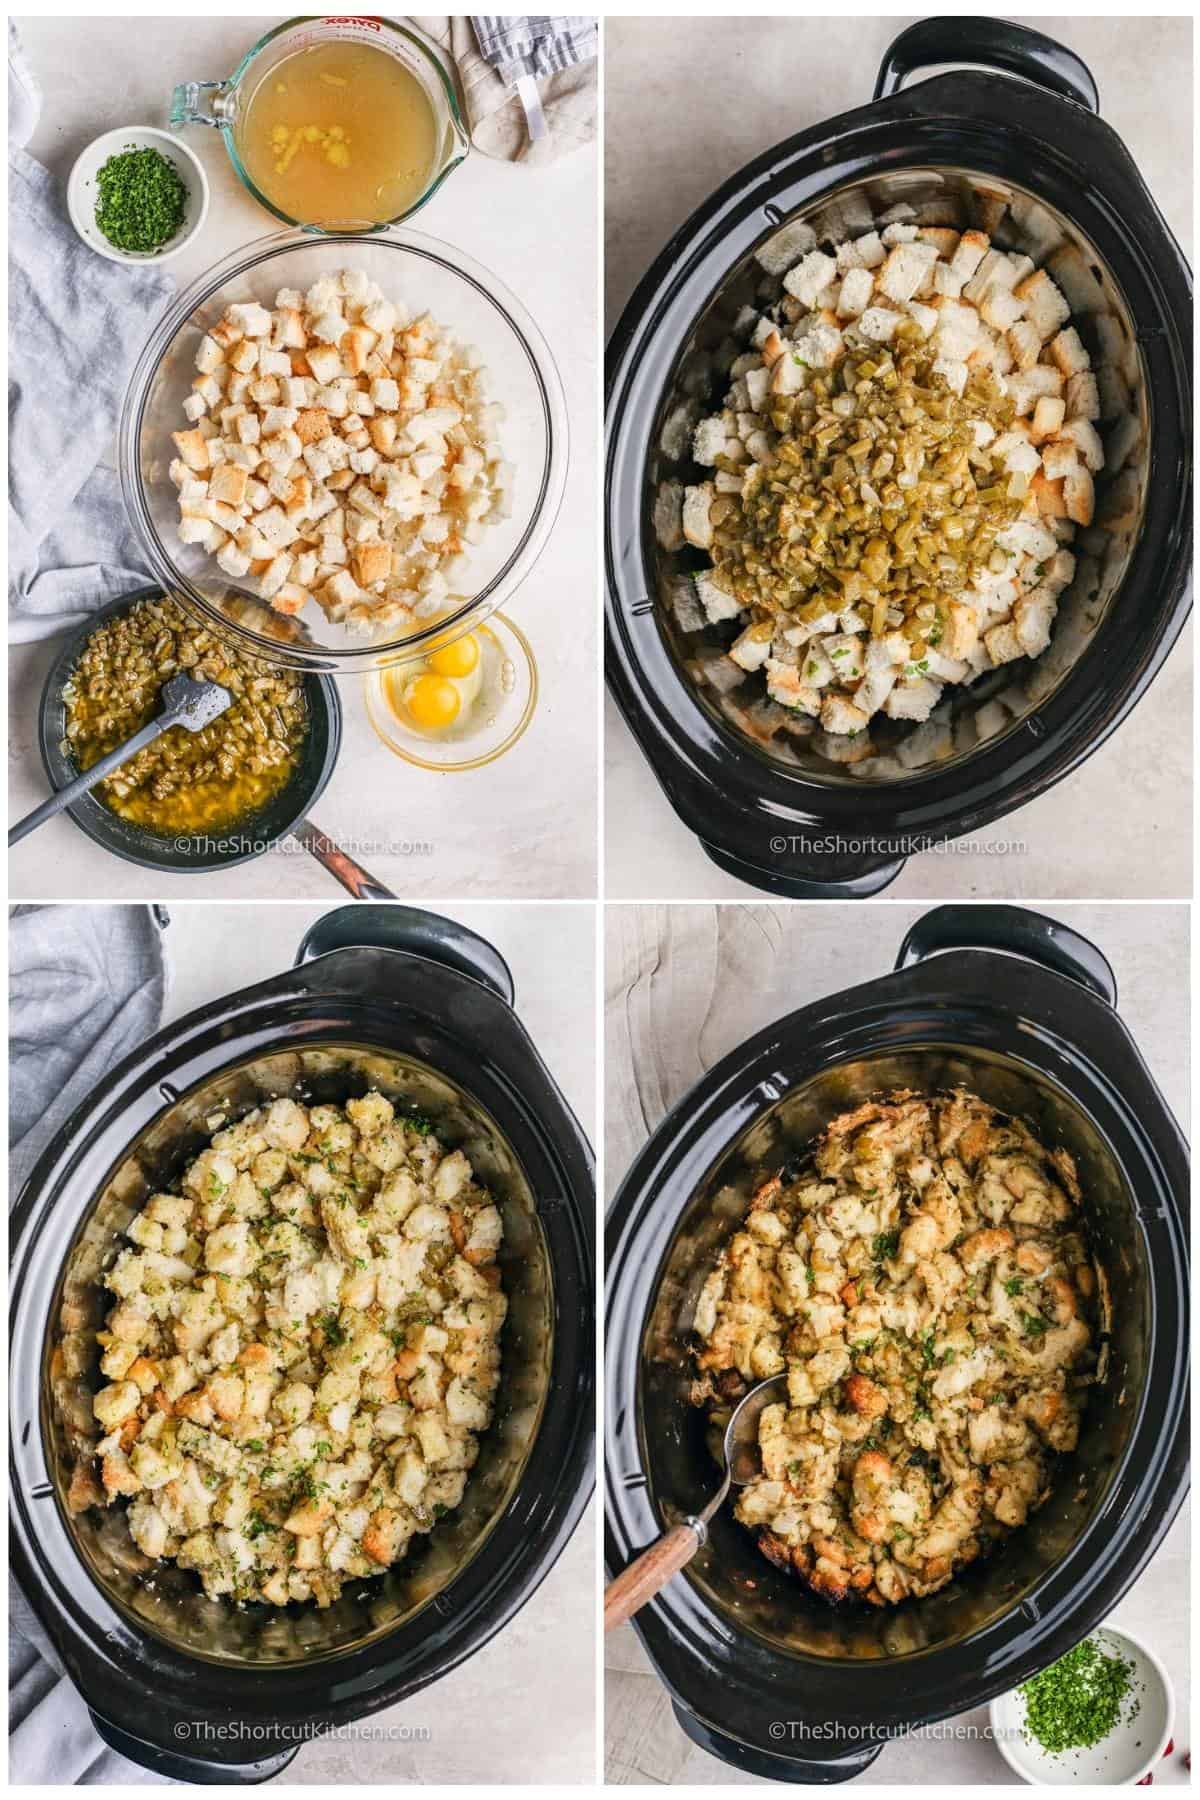 process of adding ingredients together to make Easy Slow Cooker Stuffing